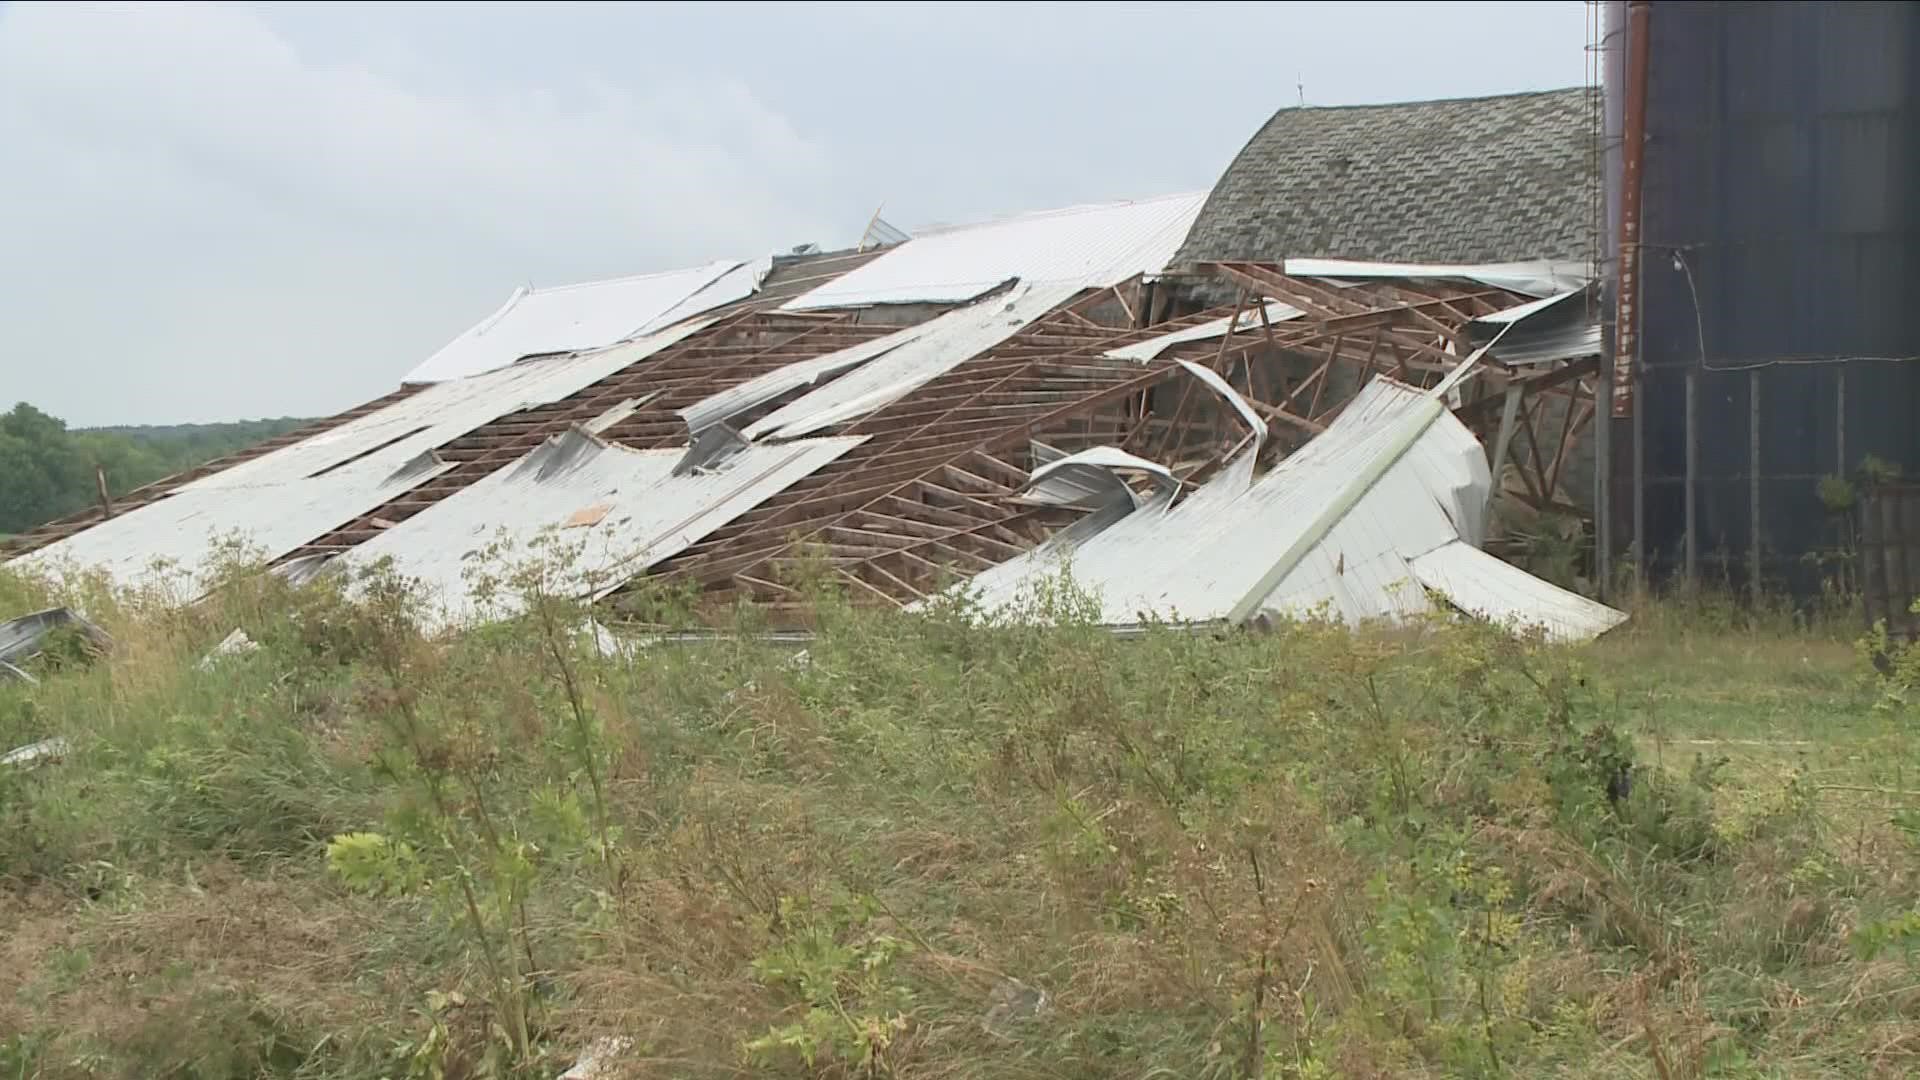 The twister destroyed property and uprooted trees, but fortunately no one was injured.